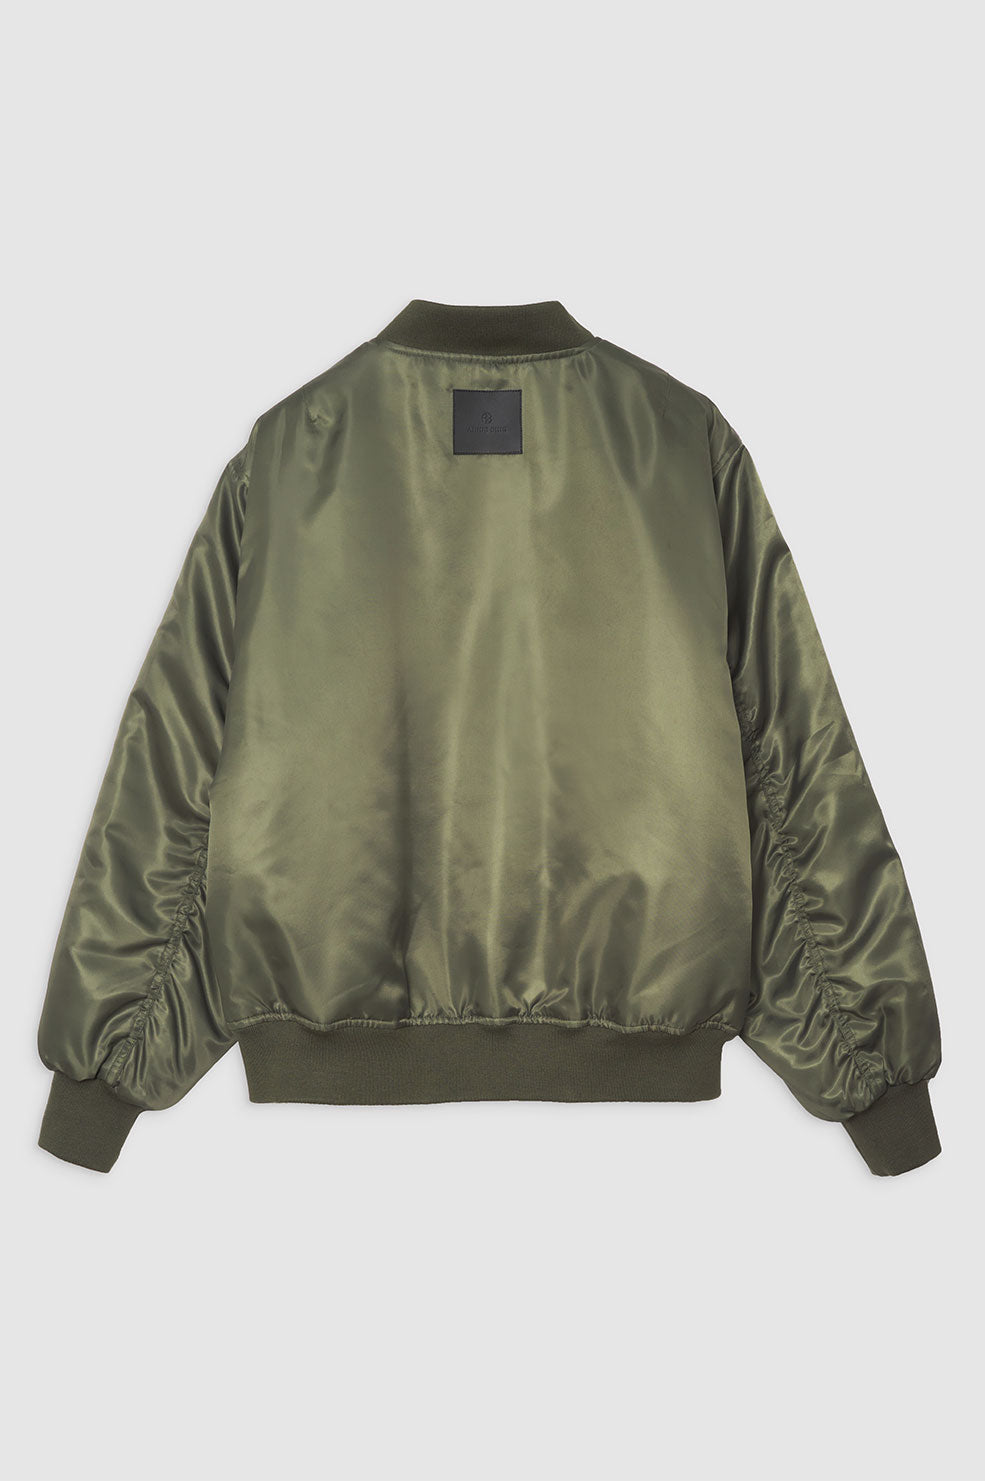 ANINE BING Leon Bomber - Army Green - Back View